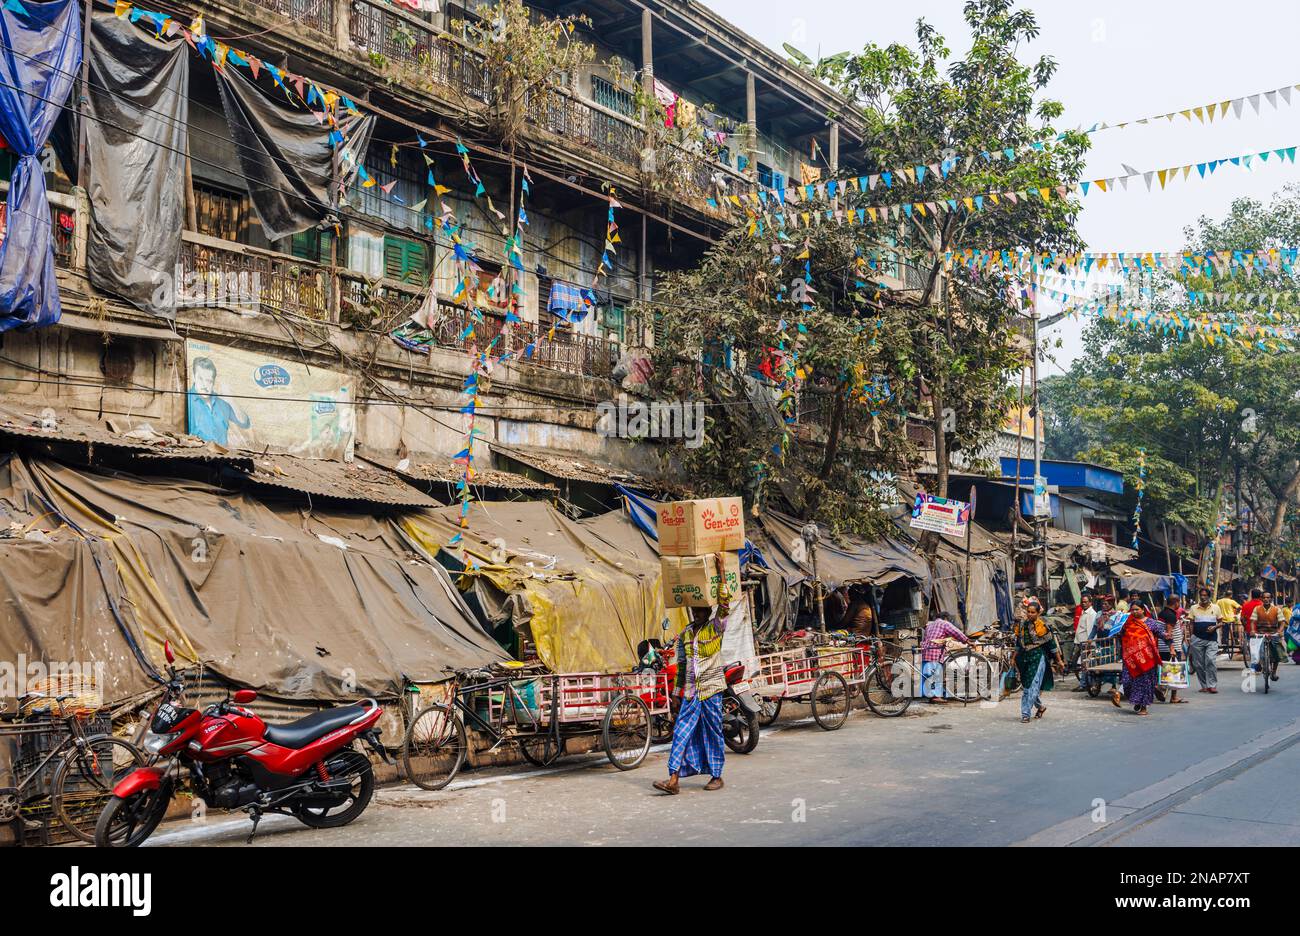 Street scene of roadside shops, stalls and kiosks in the shopping area of in Fariapukur, Shyam Bazar, a suburb of Kolkata, West Bengal, India Stock Photo